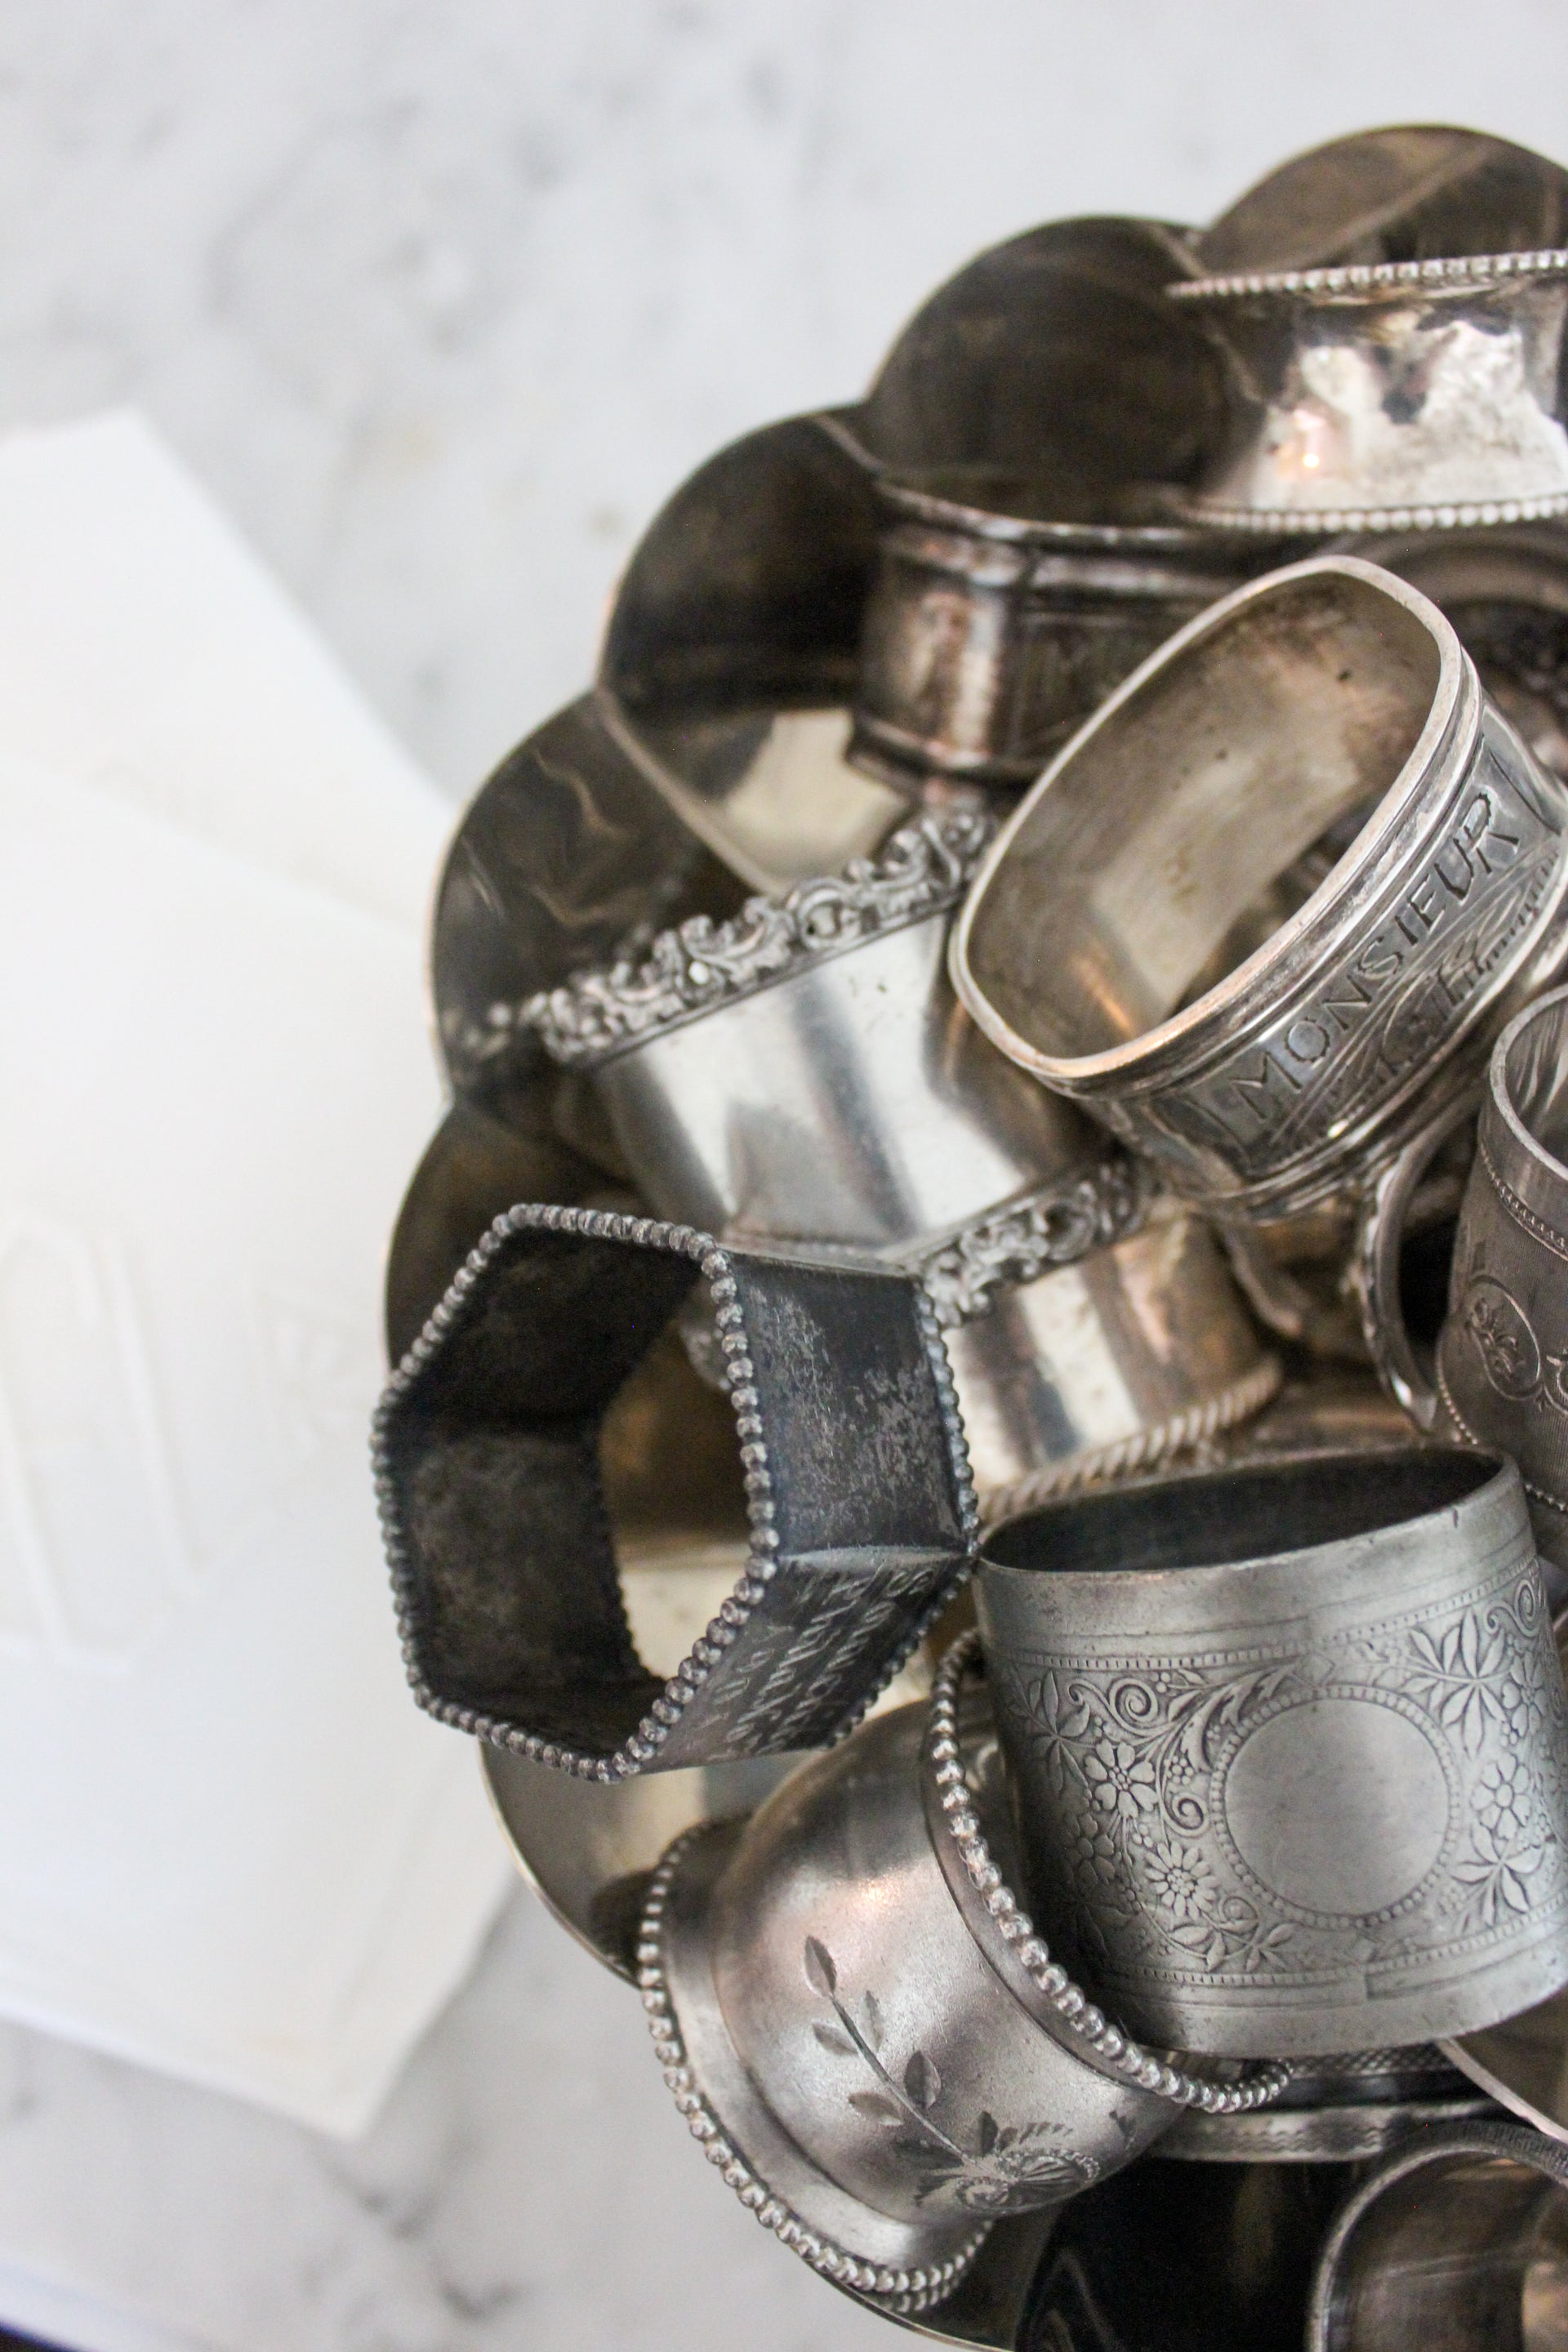 Collected Antique & Vintage Silver Plate Napkin Rings